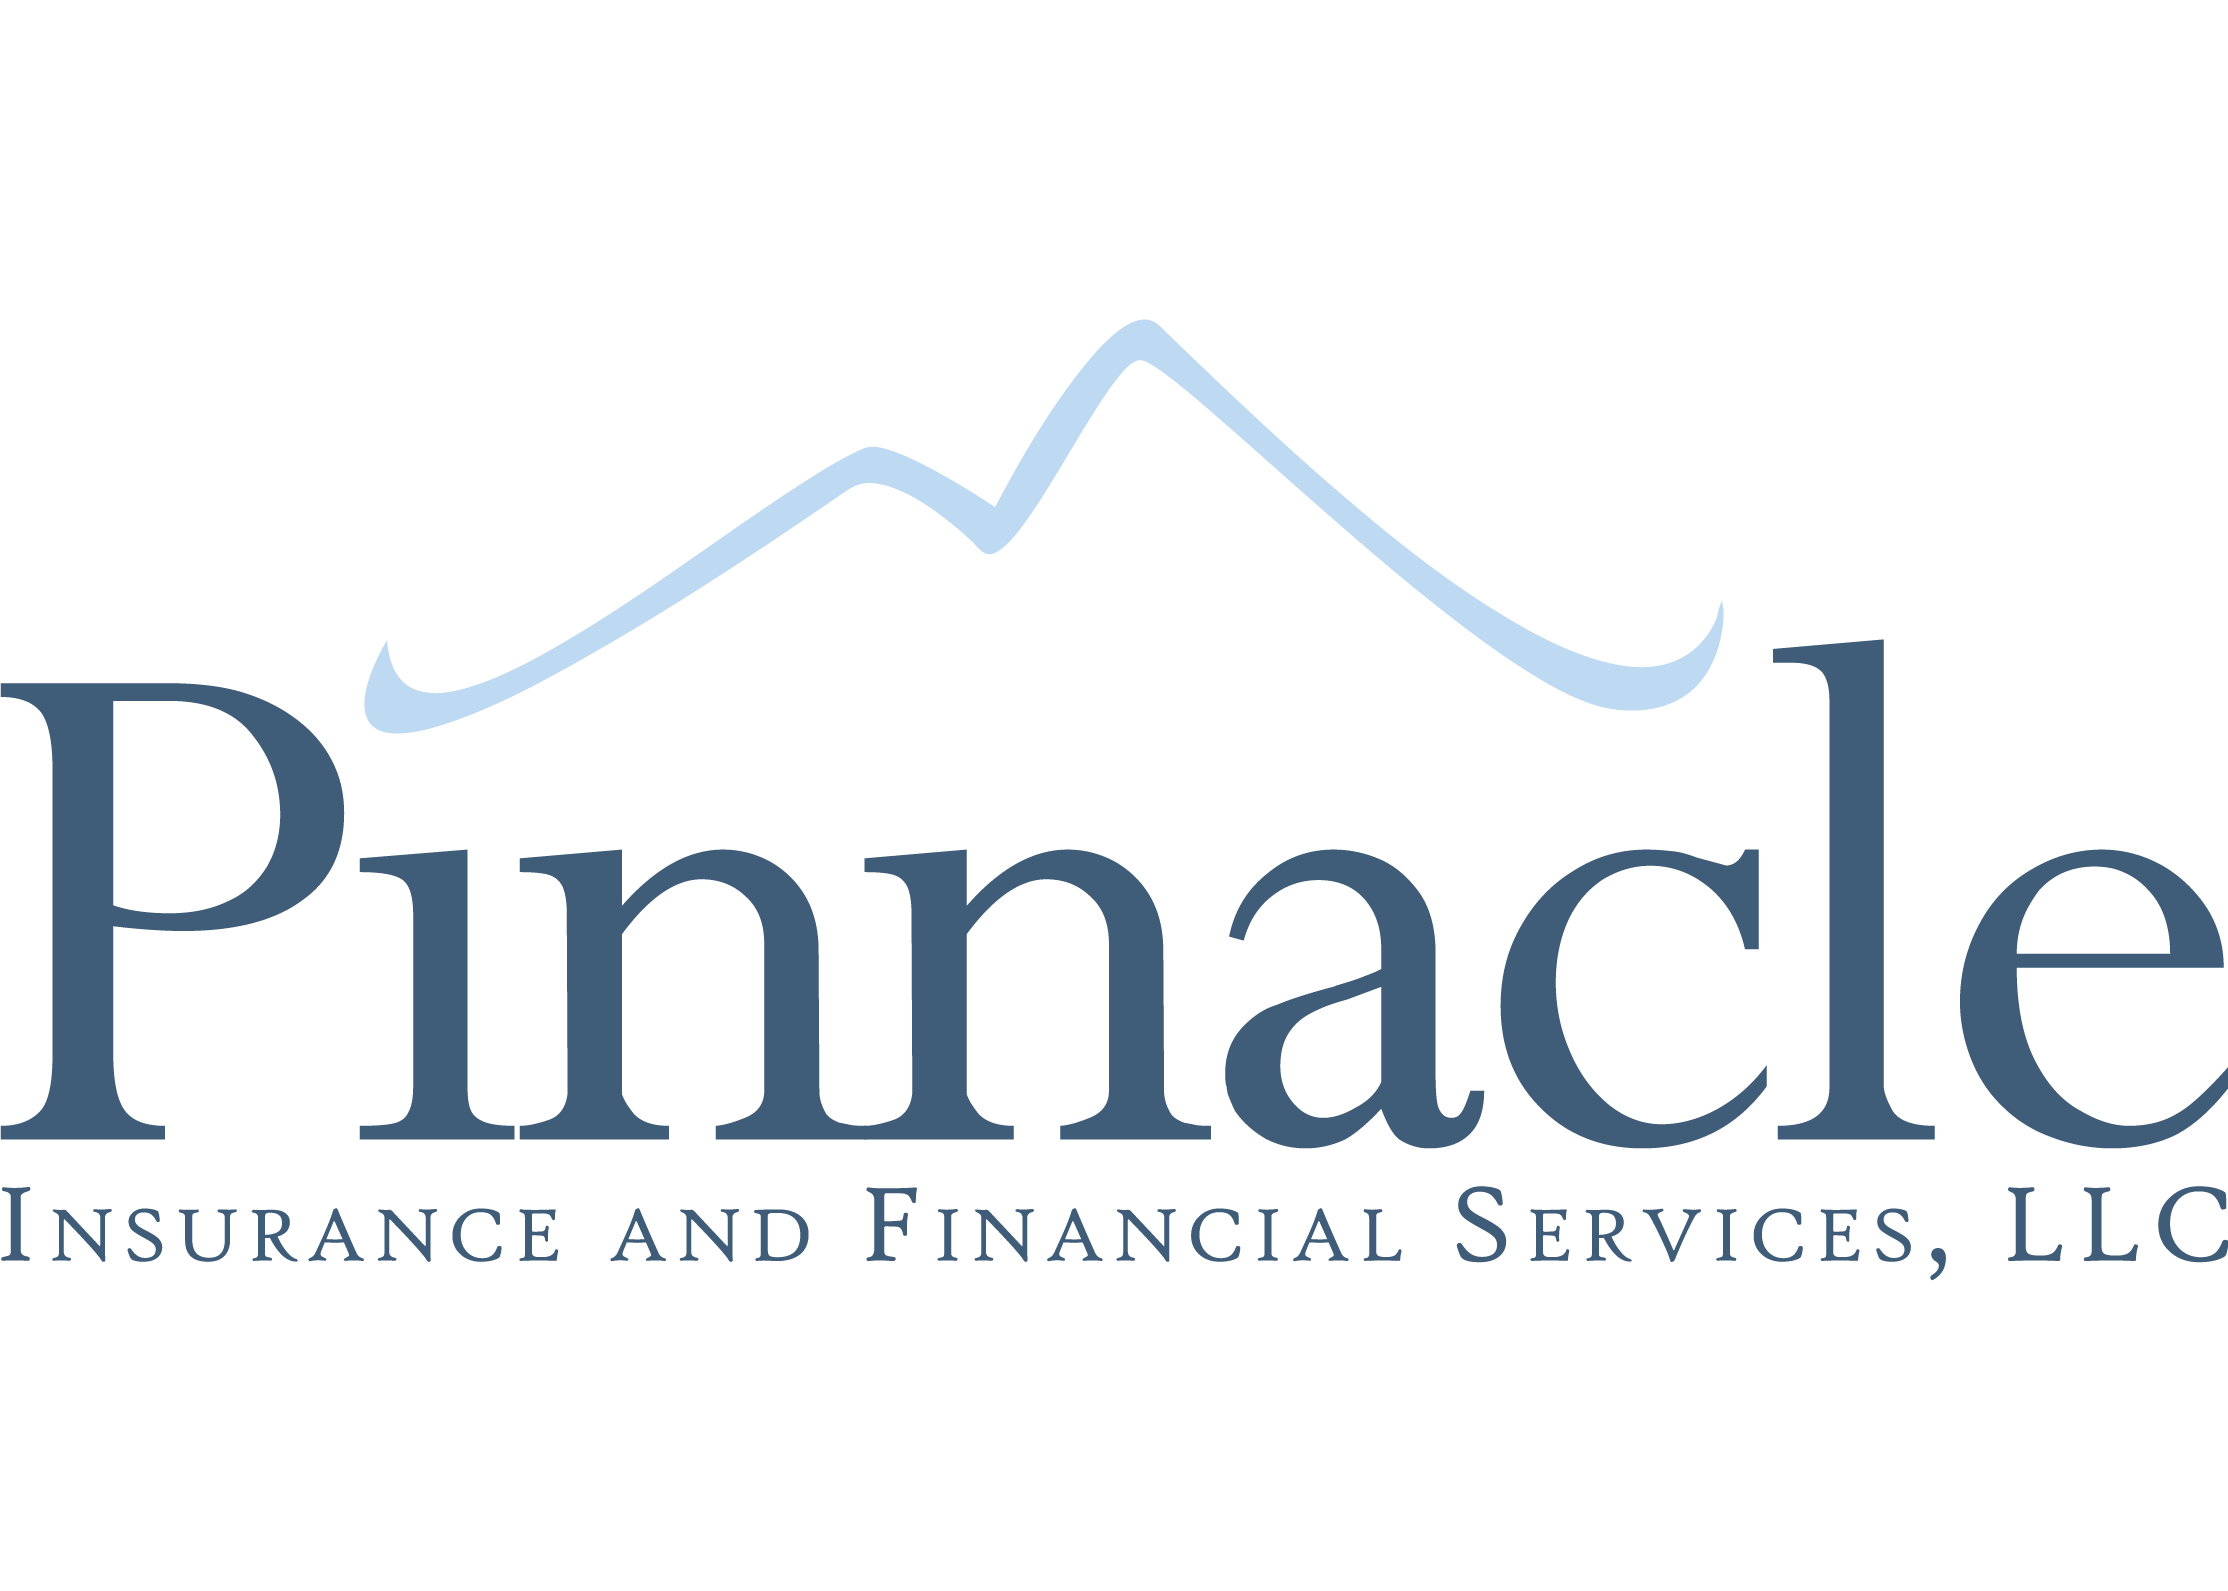 Pinnacle Insurance and Financial Services IMO logo